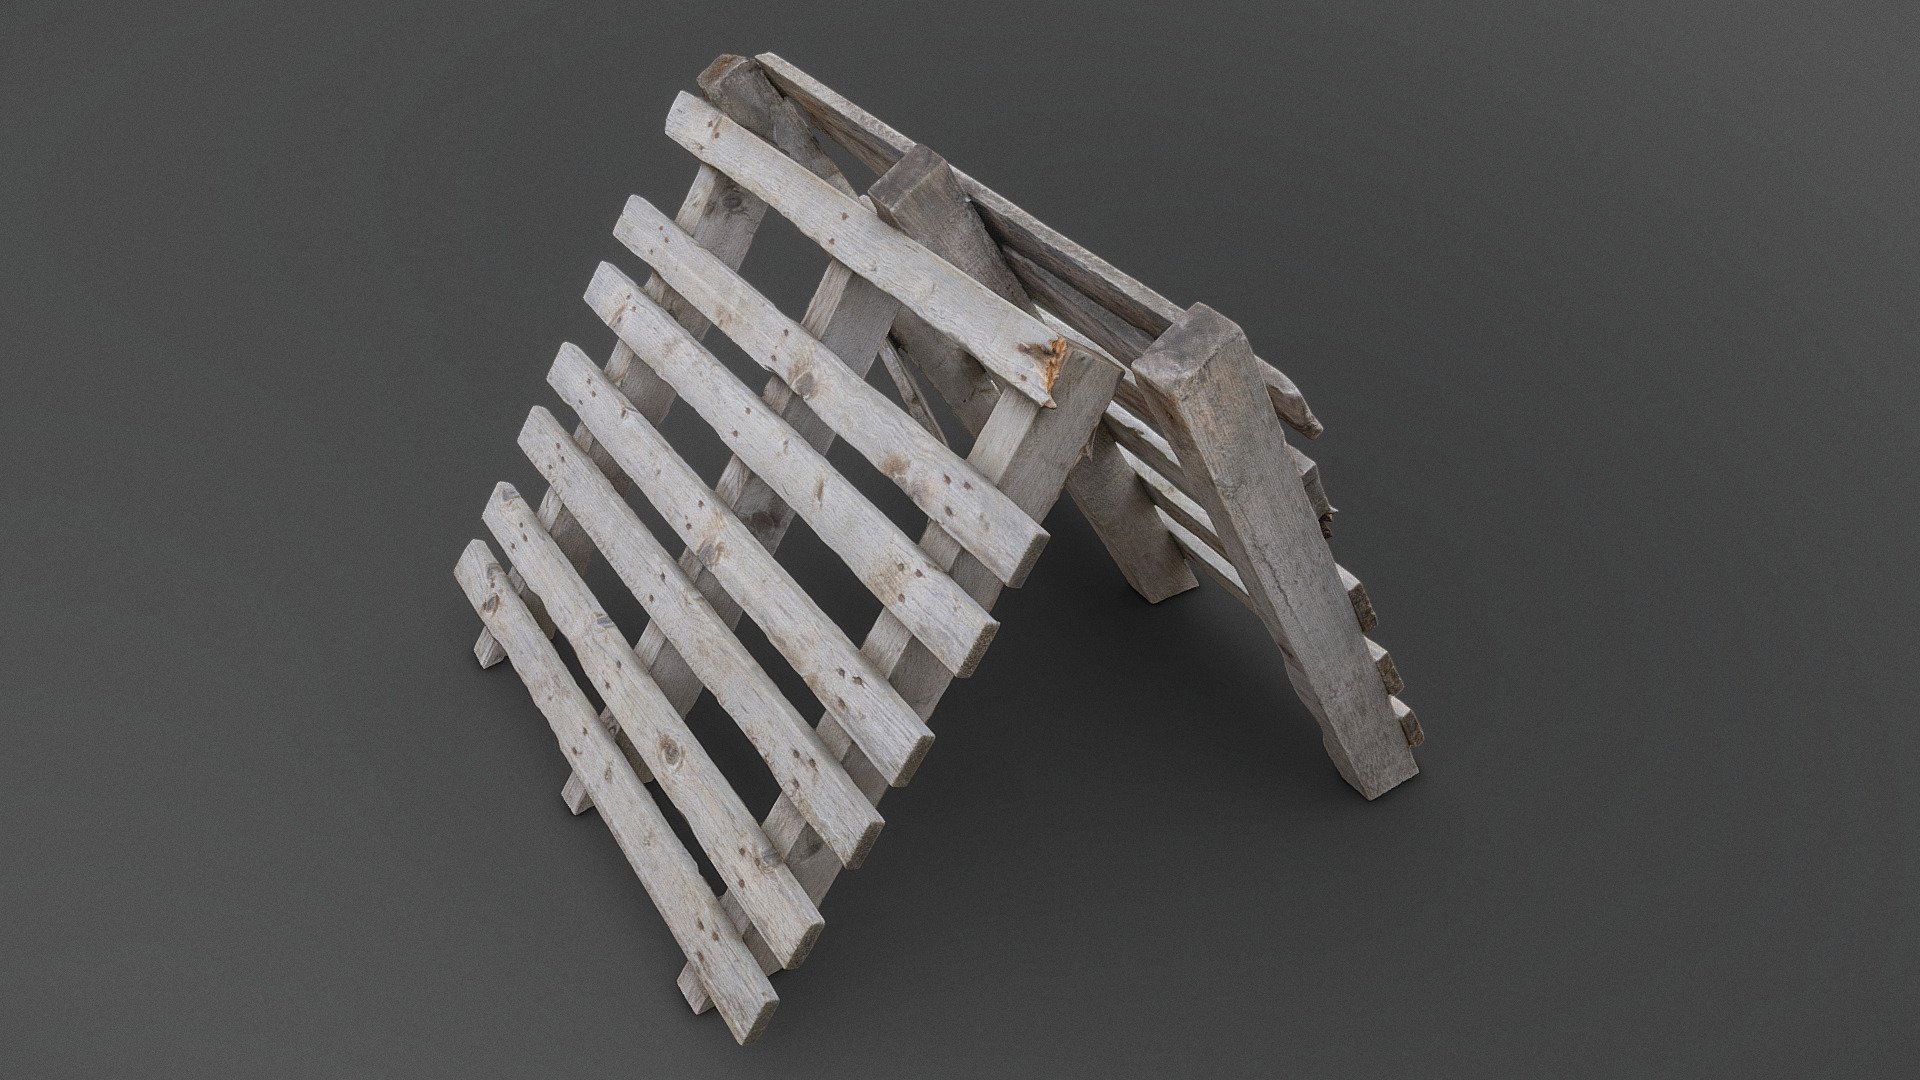 Wooden A stand barricade block sawhorse

Photogrammetry scan 180x24MP, 3x16K texture + HD Normals, tif available as additional format download - Wooden A stand - Buy Royalty Free 3D model by matousekfoto 3d model